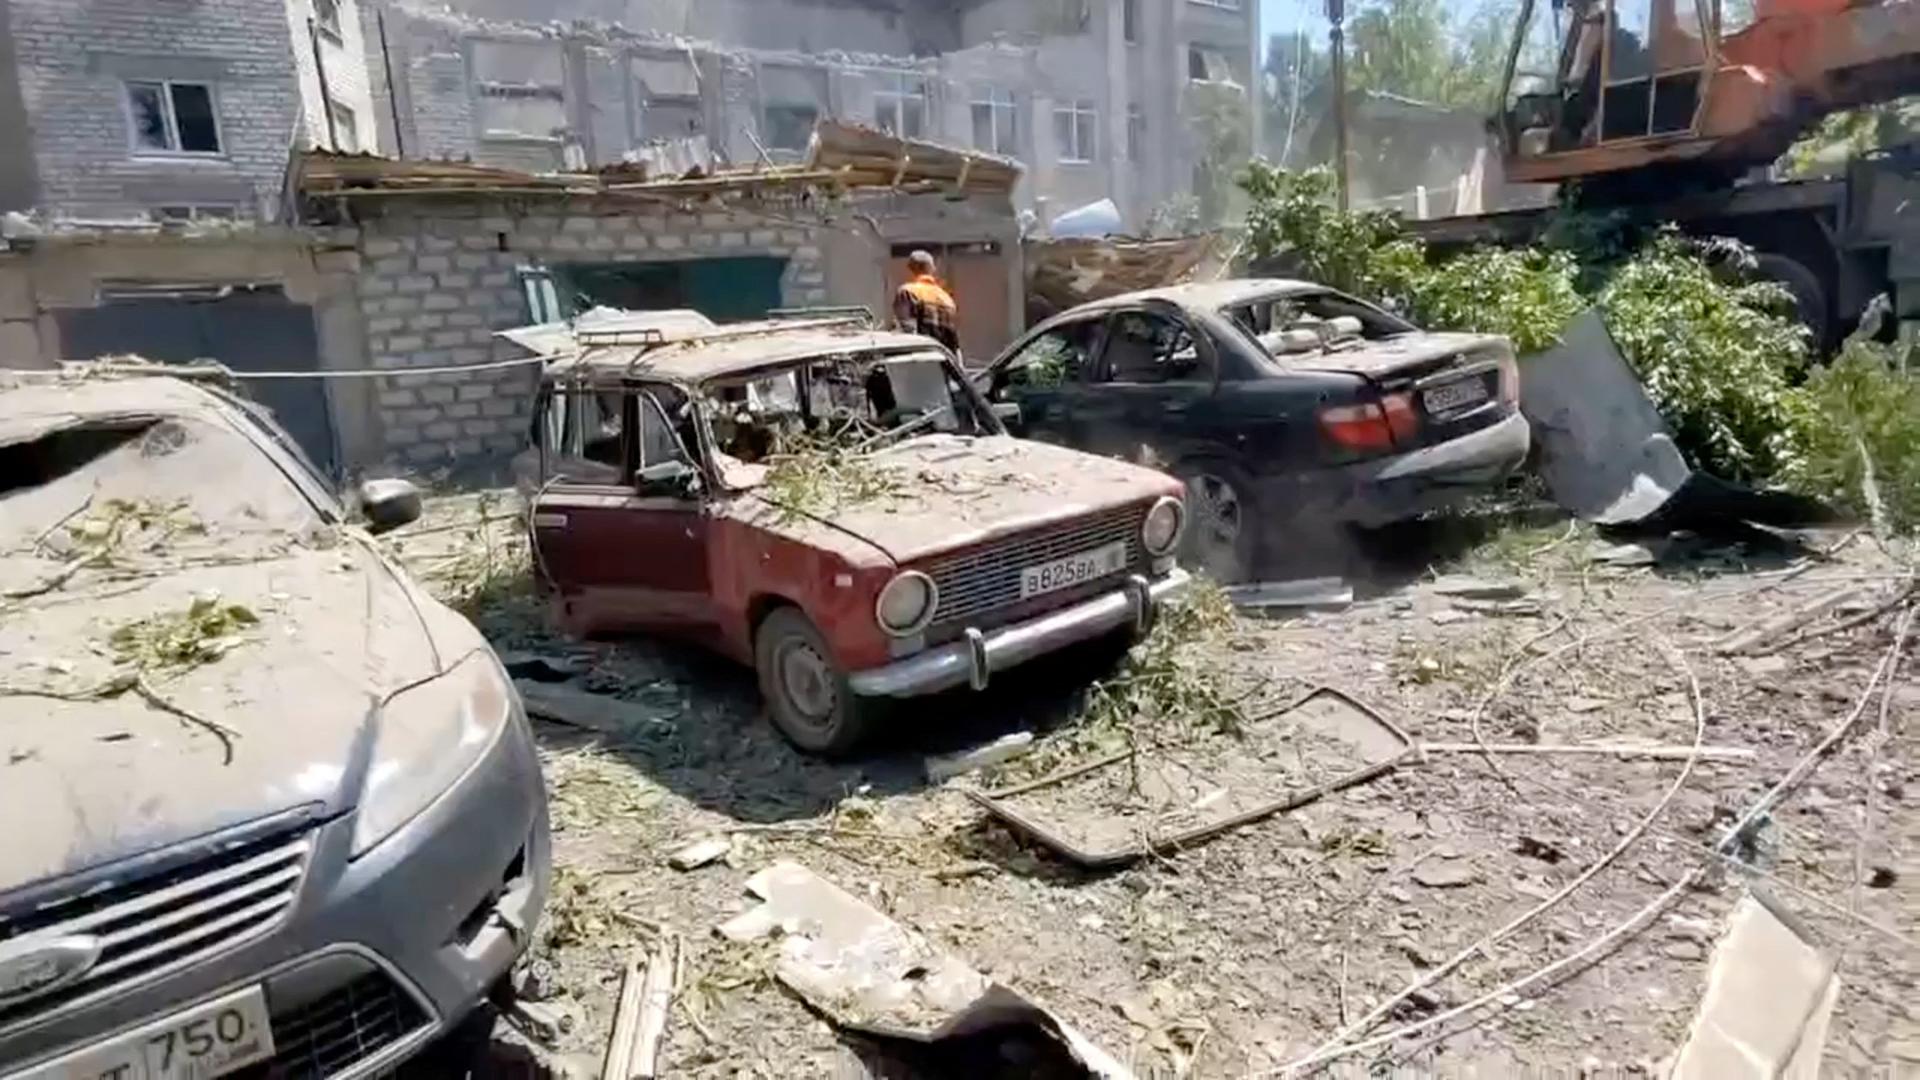 A view shows a destroyed building and cars following what local Russian-installed authorities called a Ukrainian military strike in the settlement of Yubileiny in the Luhansk region, Russian-controlled Ukraine, in this still image from video released May 20, 2024. Leonid Pasechnik Telegram channel/Handout via REUTERS ATTENTION EDITORS - THIS IMAGE HAS BEEN SUPPLIED BY A THIRD PARTY. NO RESALES. NO ARCHIVES. MANDATORY CREDIT. Photo: Leonid Pasechnik Telegram channe/REUTERS